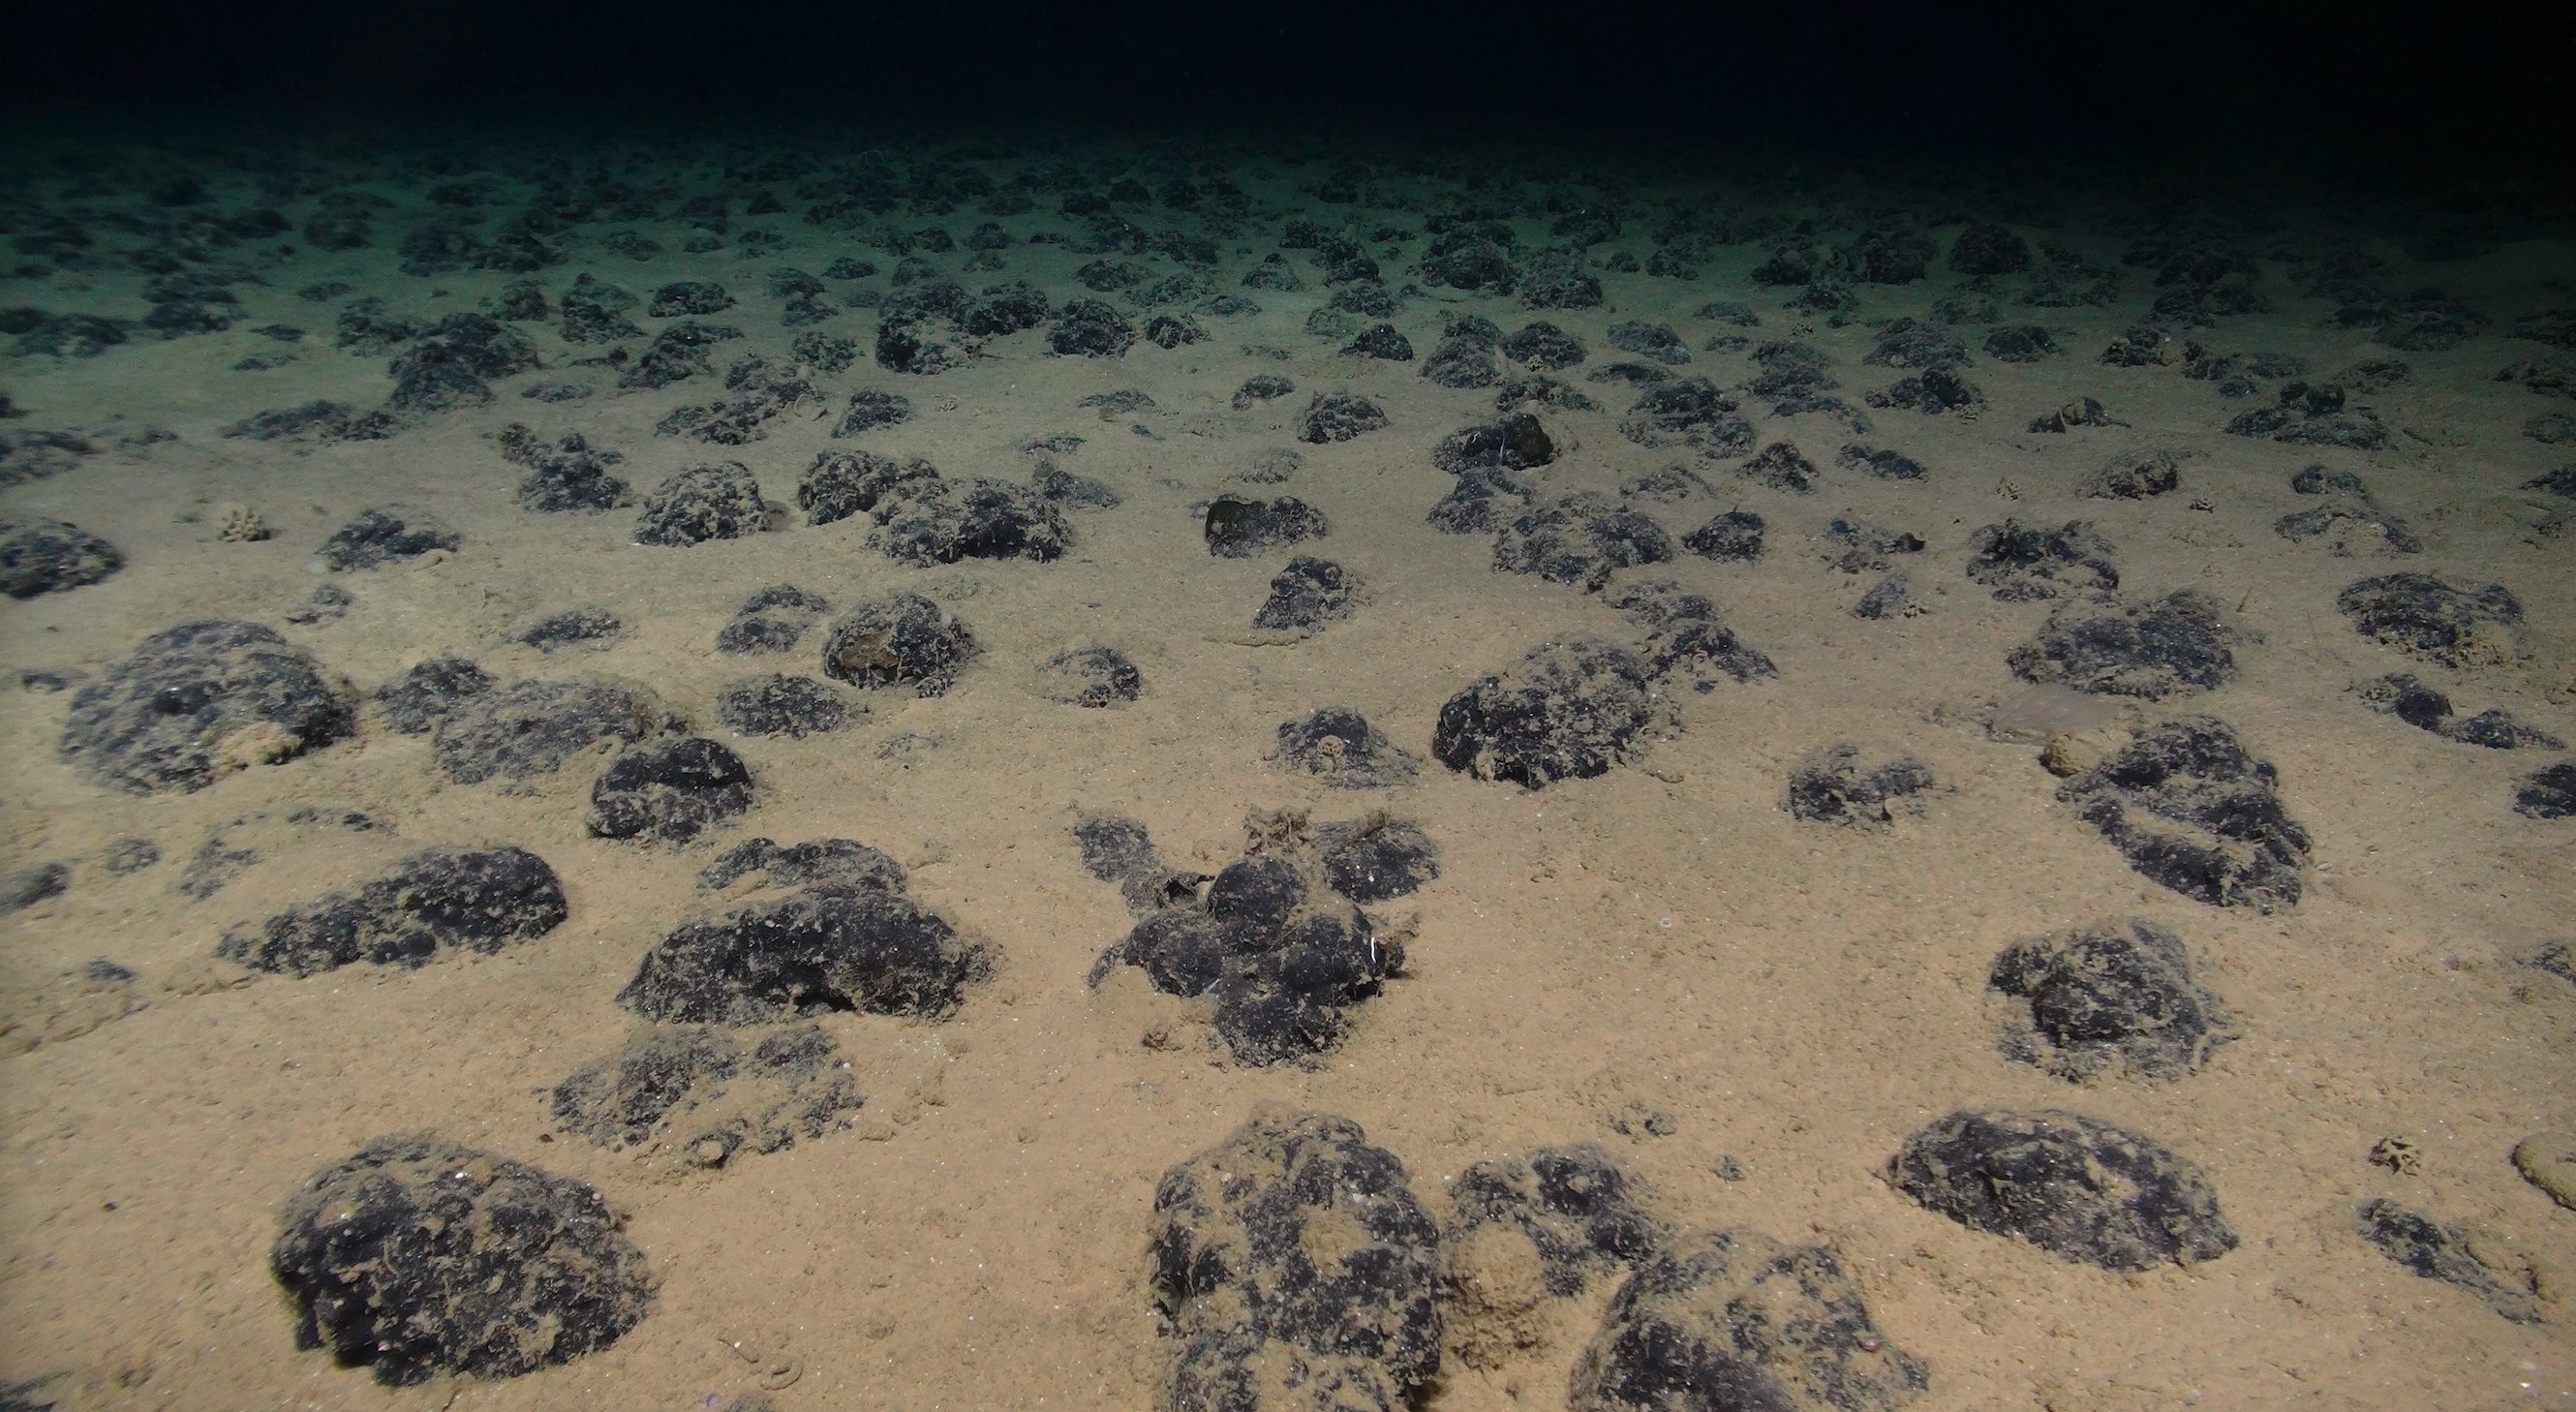 Nodules on the seabed